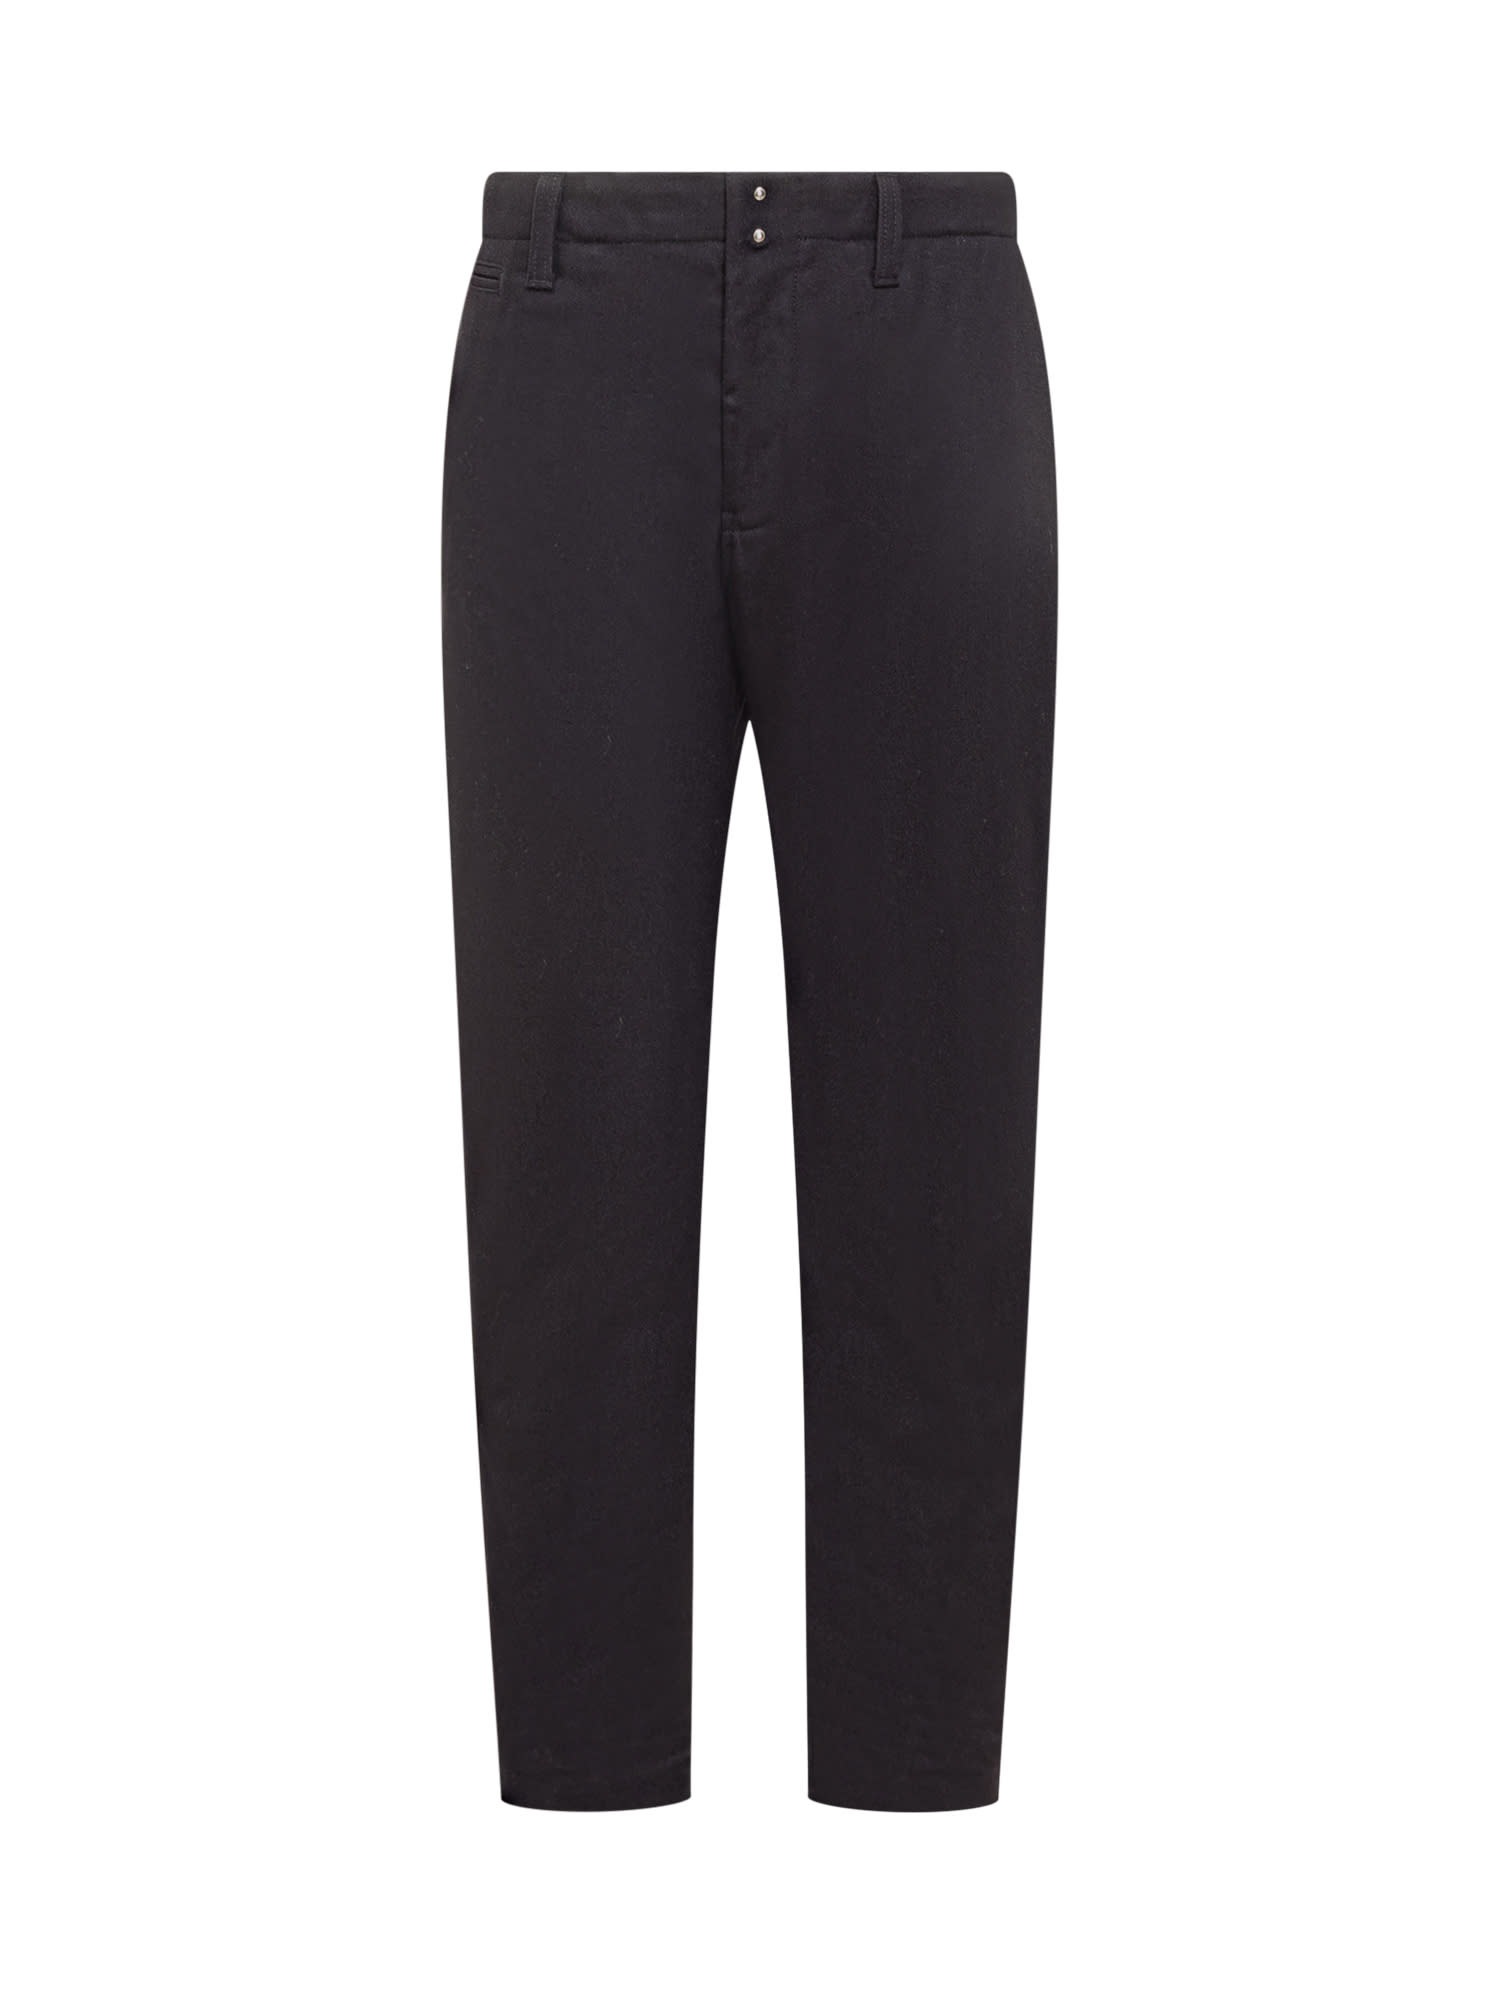 Yale Trousers